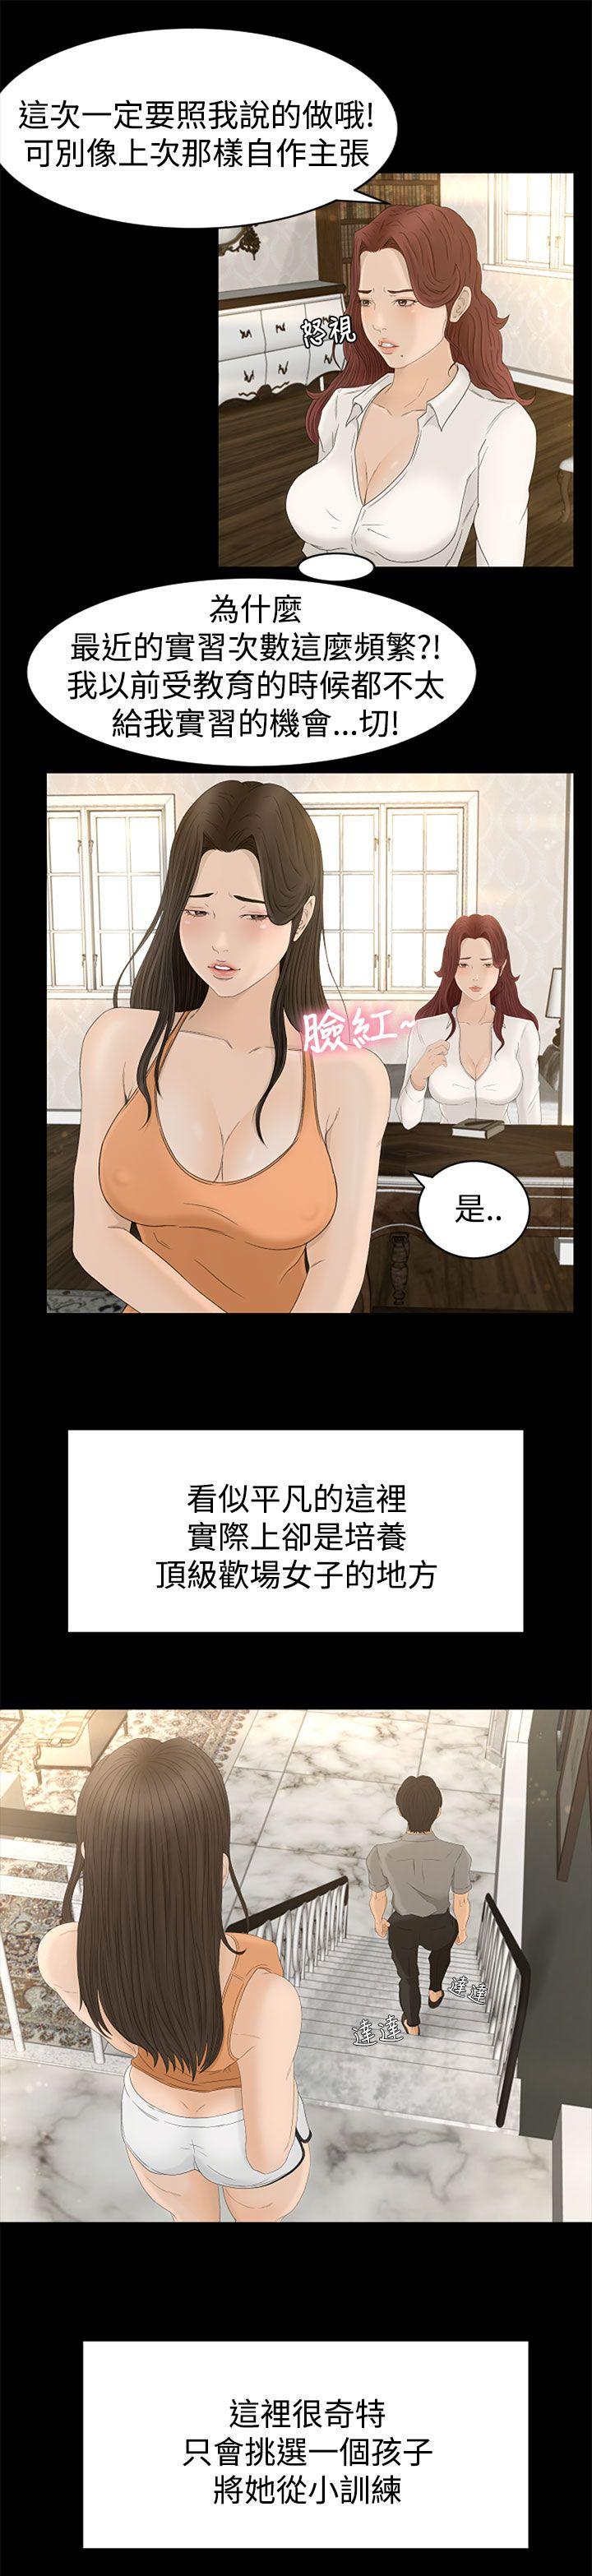 Hardcore Rough Sex 猎物 第1話 [Chinese]中文 Awesome - Page 12